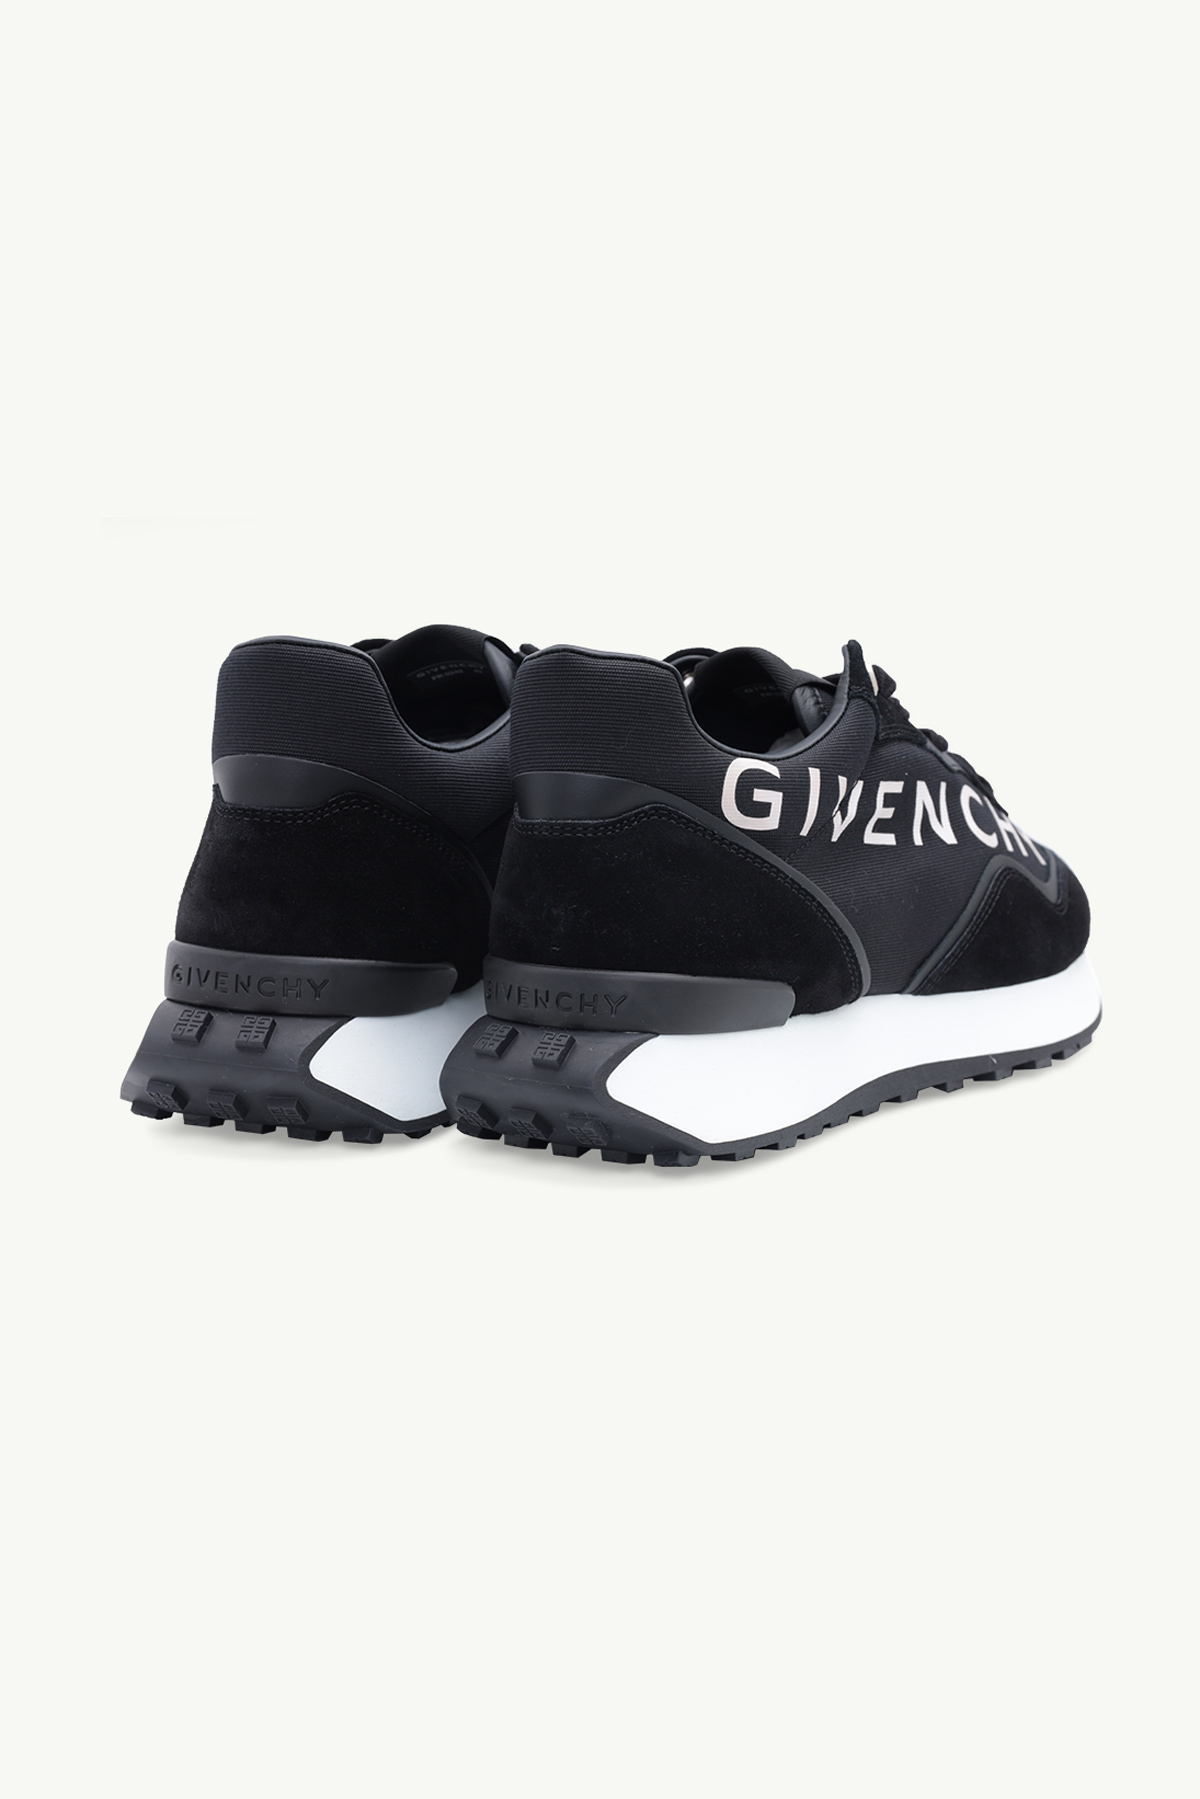 GIVENCHY Men GIV Runner Sneakers in Black/White Suede x Nylon 2